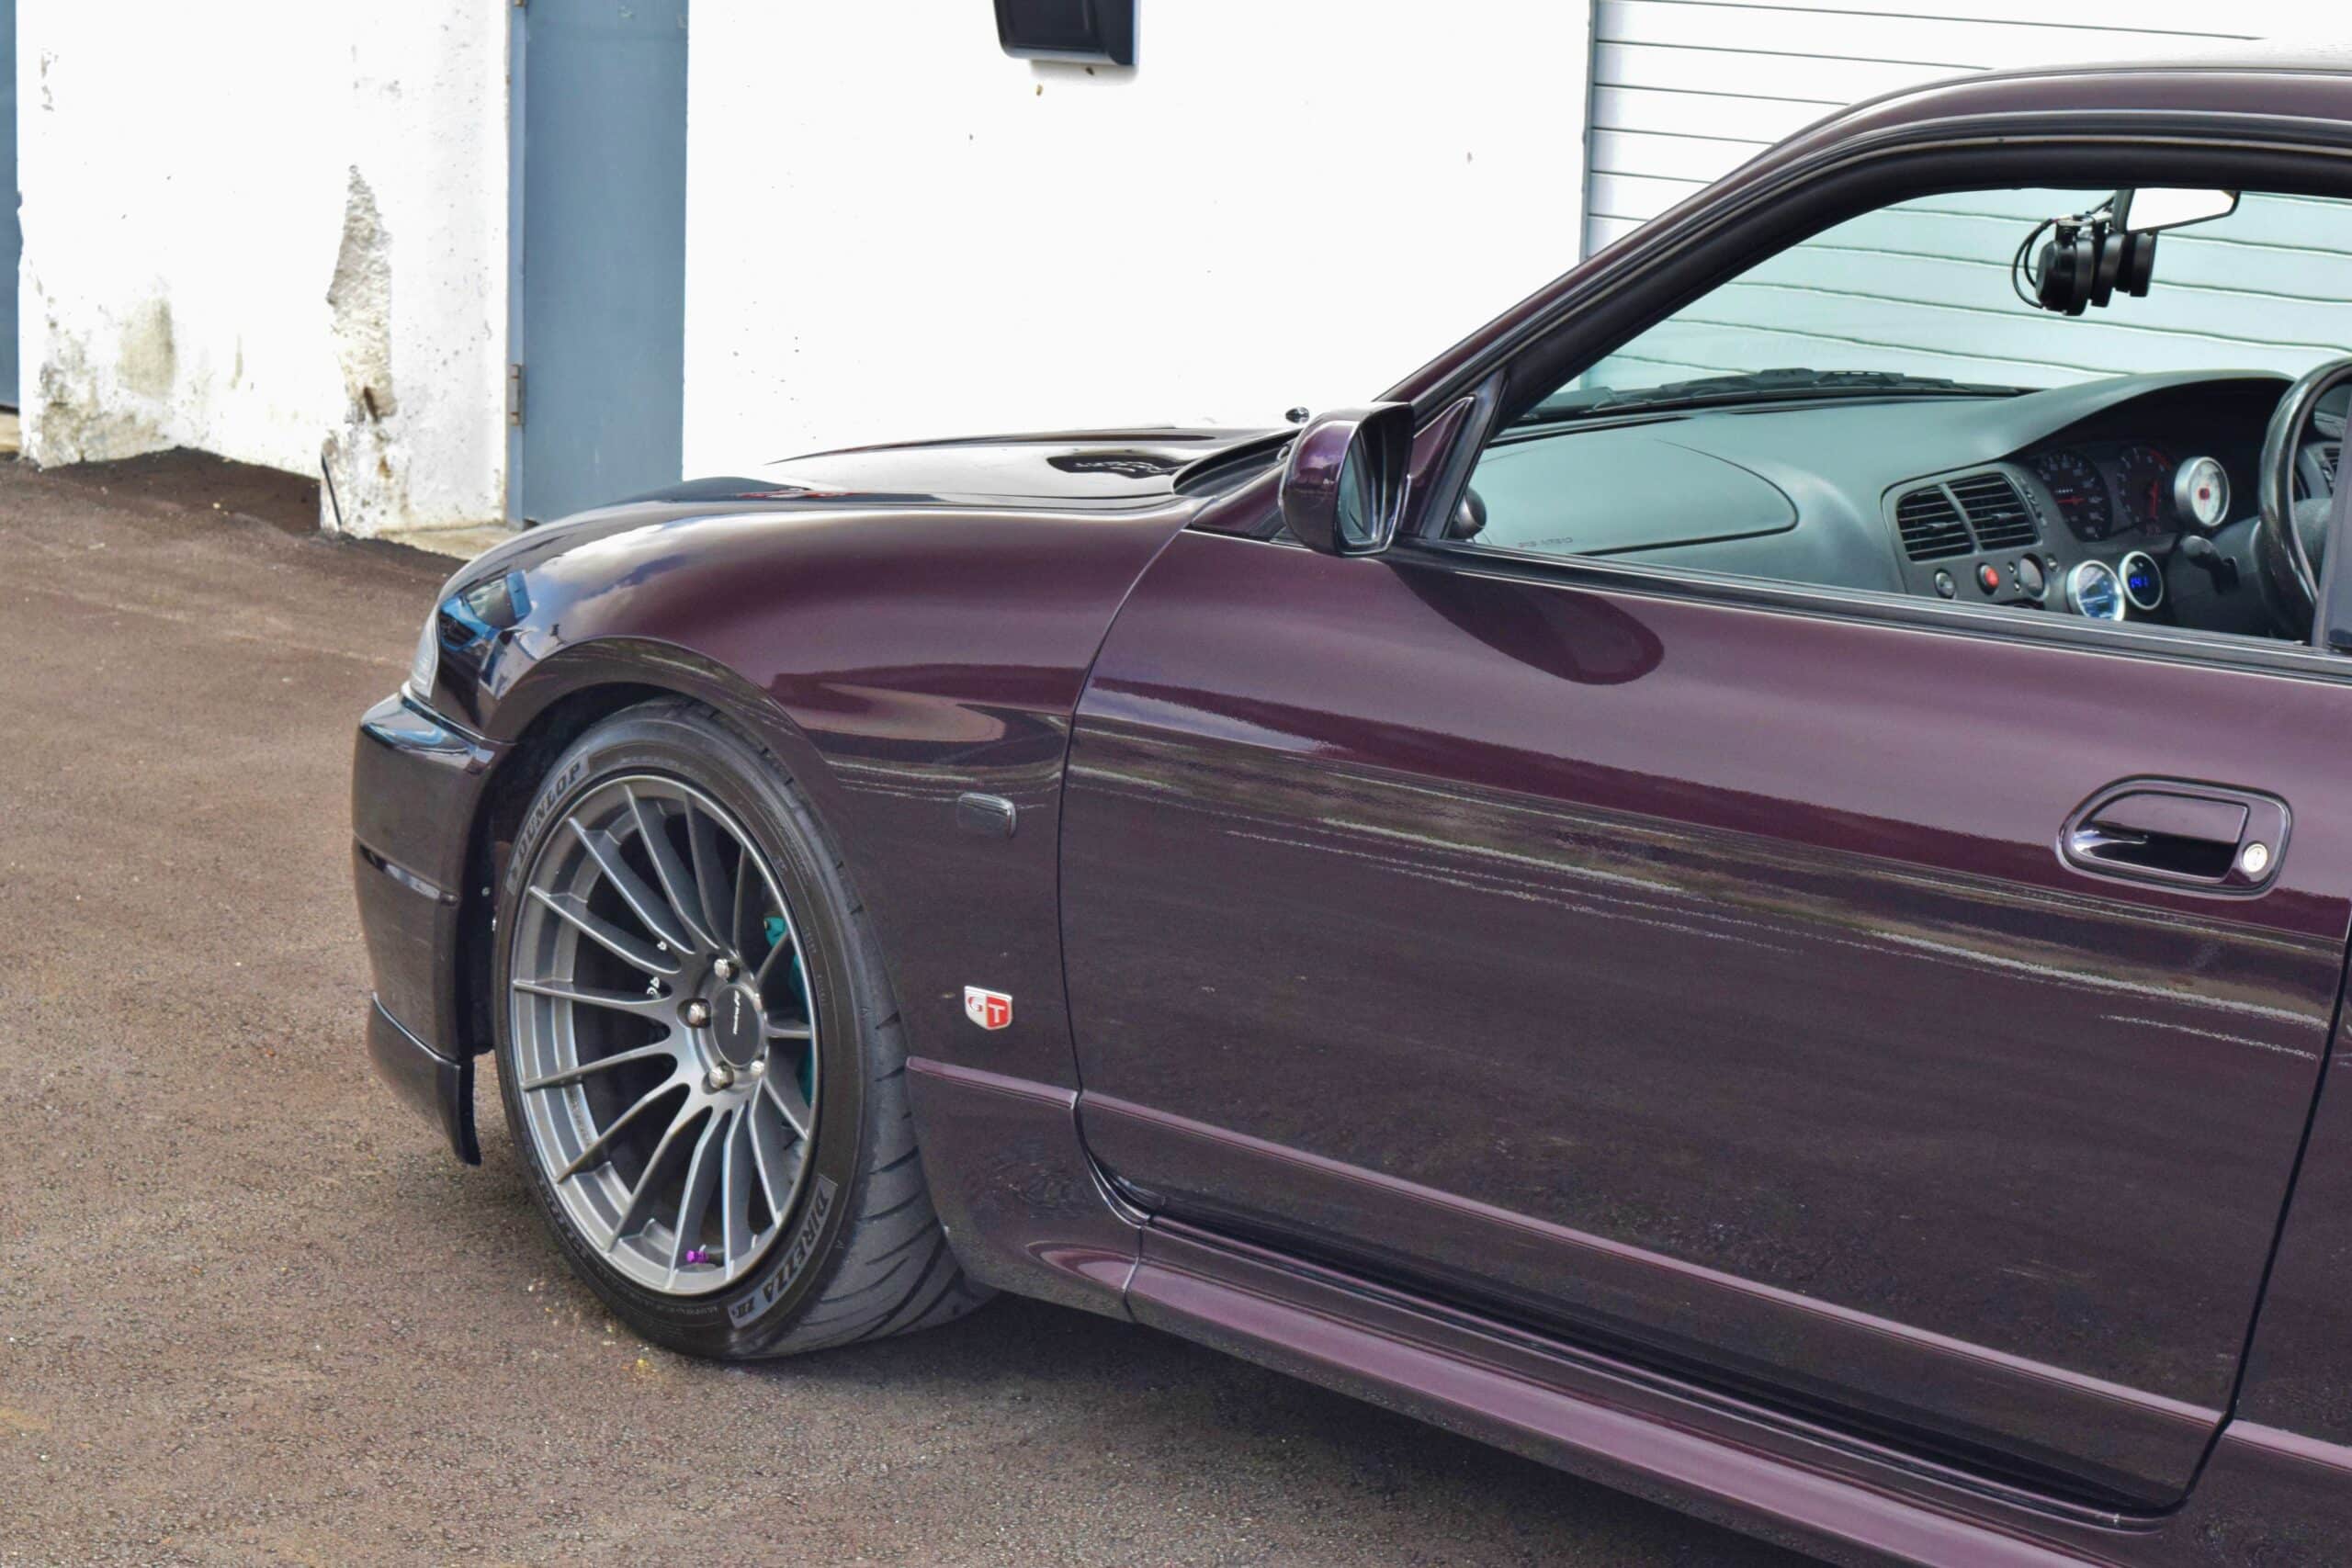 1995 Nissan GT-R R33 SKYLINE Midnight Purple-Single Turbo-550 AWHP -Only 37K Miles- SHOW CAR – Fully Sorted